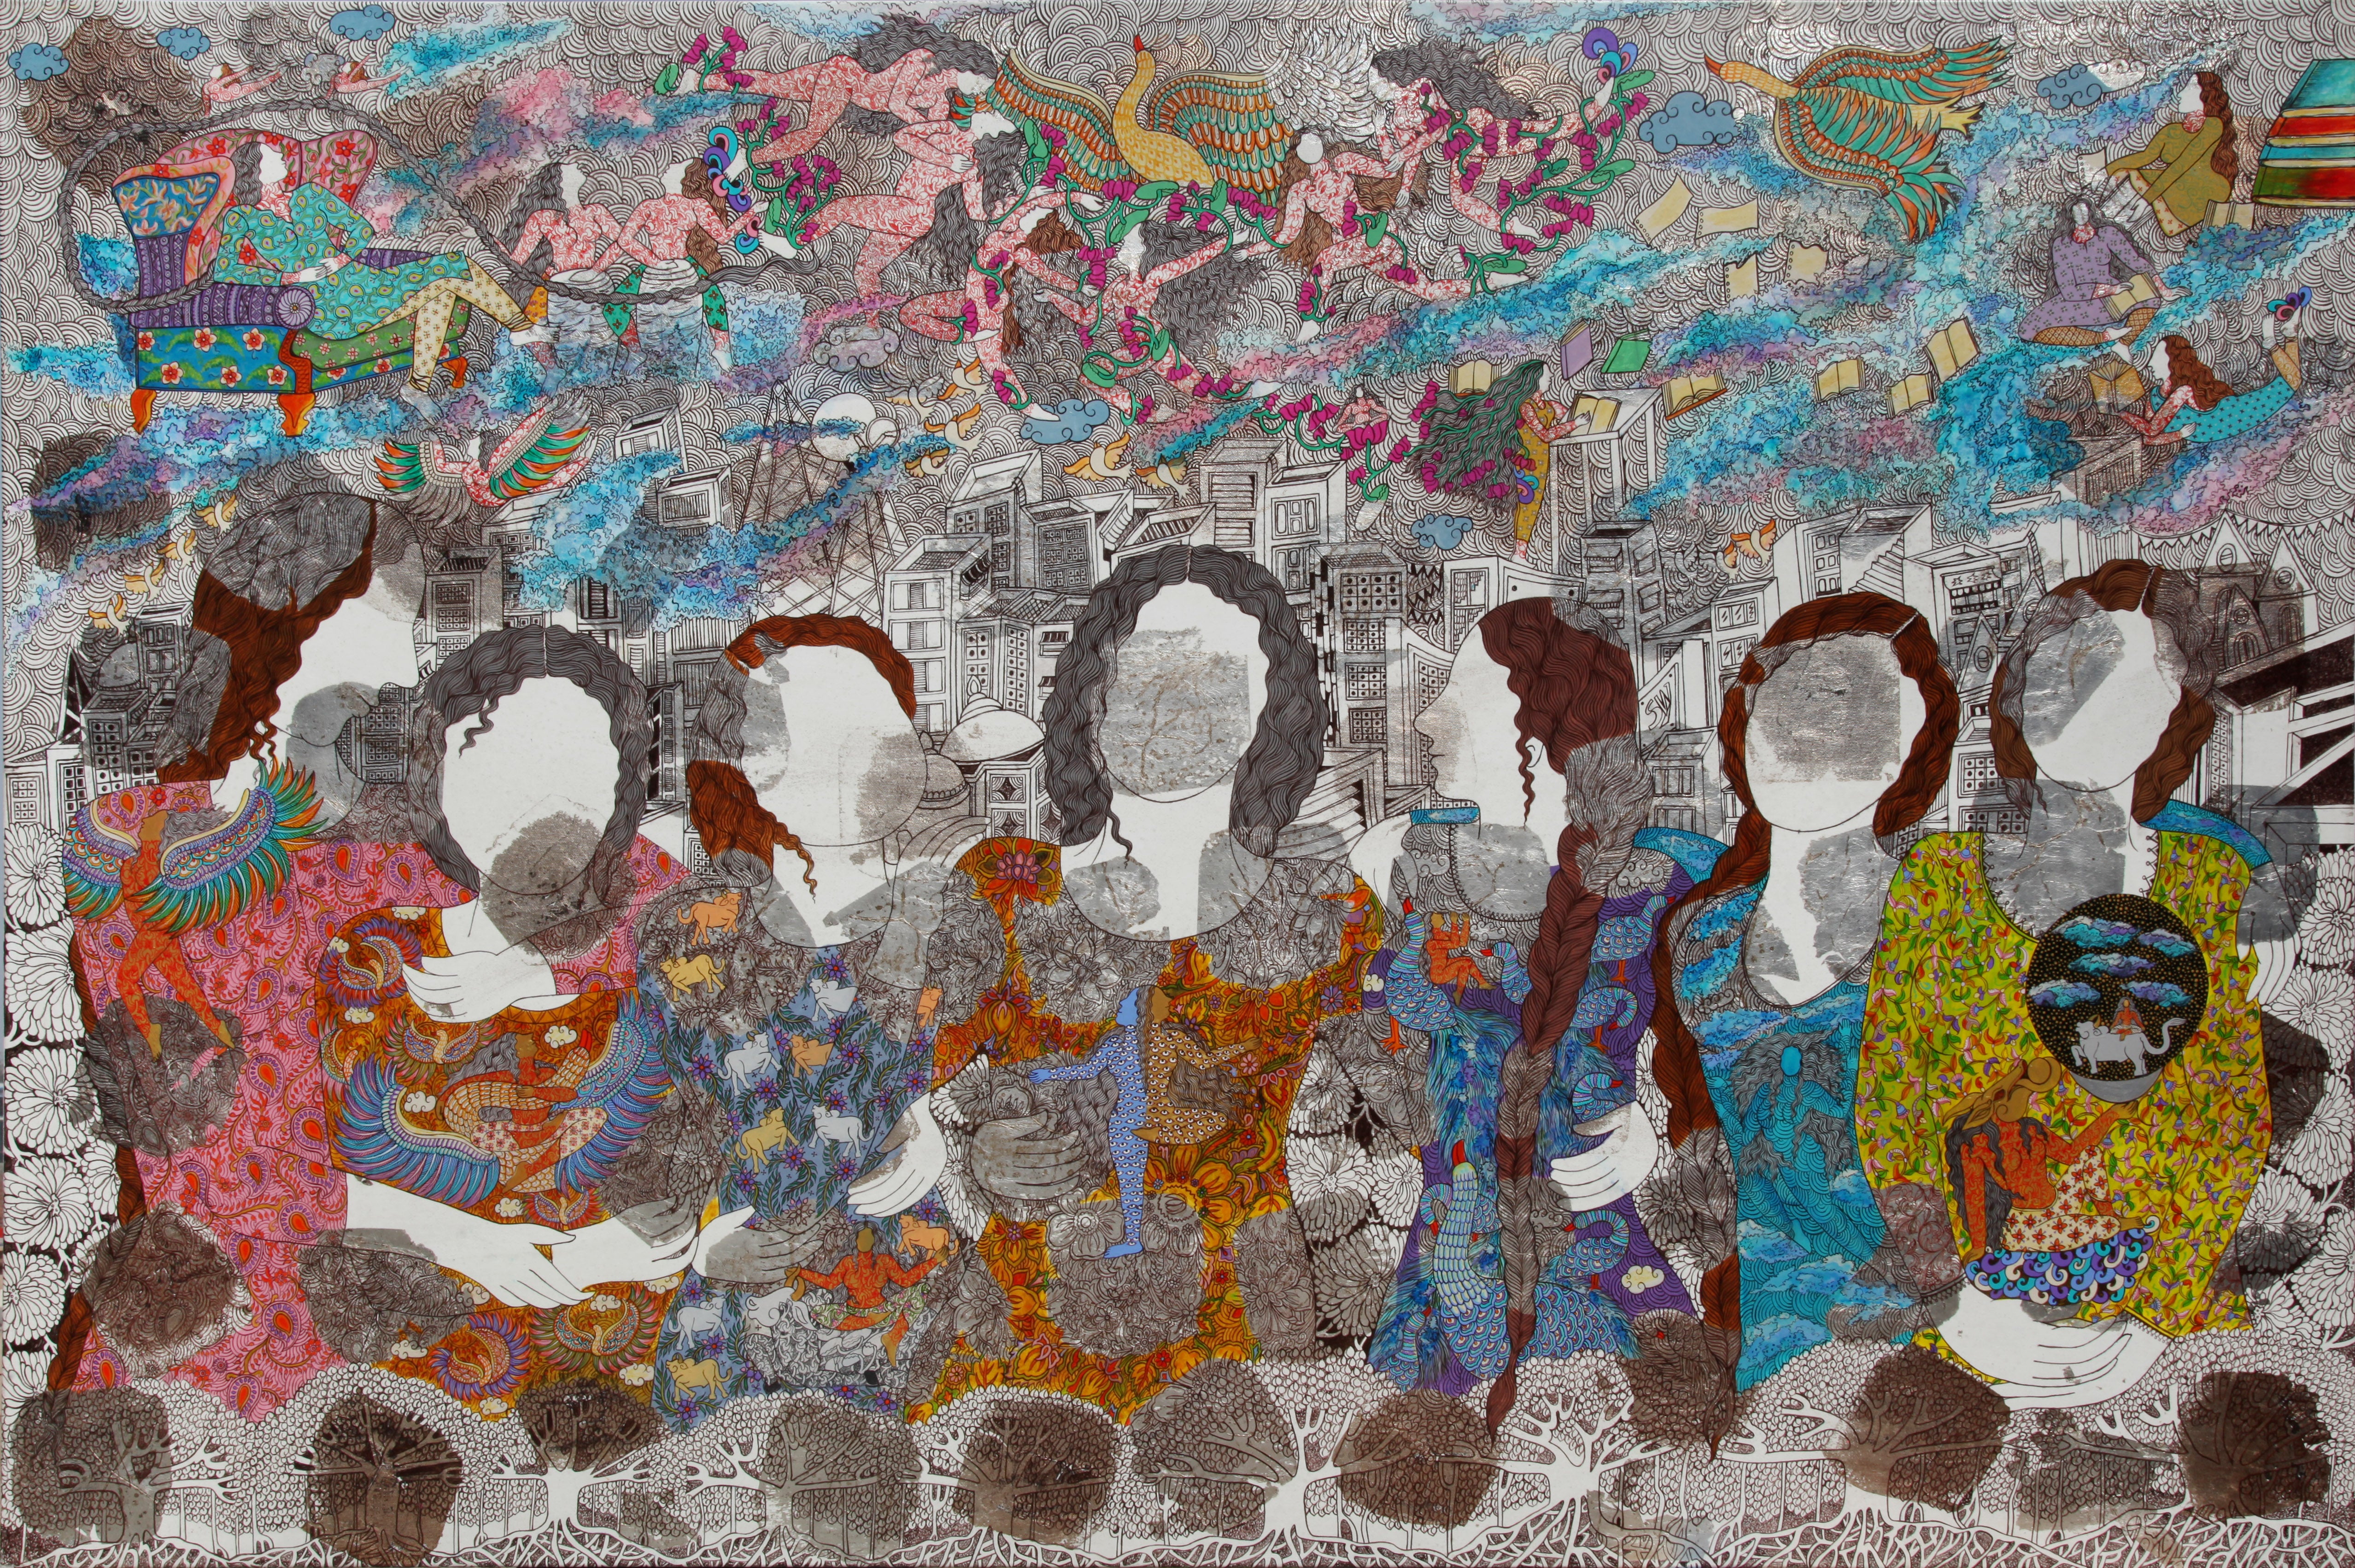 The SaptMatrika's-Of Mothers Sisters Daughters and Friends|Seema Kohli- Acrylics and inks on canvas with 24ct gold and silver leaf, 2020, 48 x 72 inches